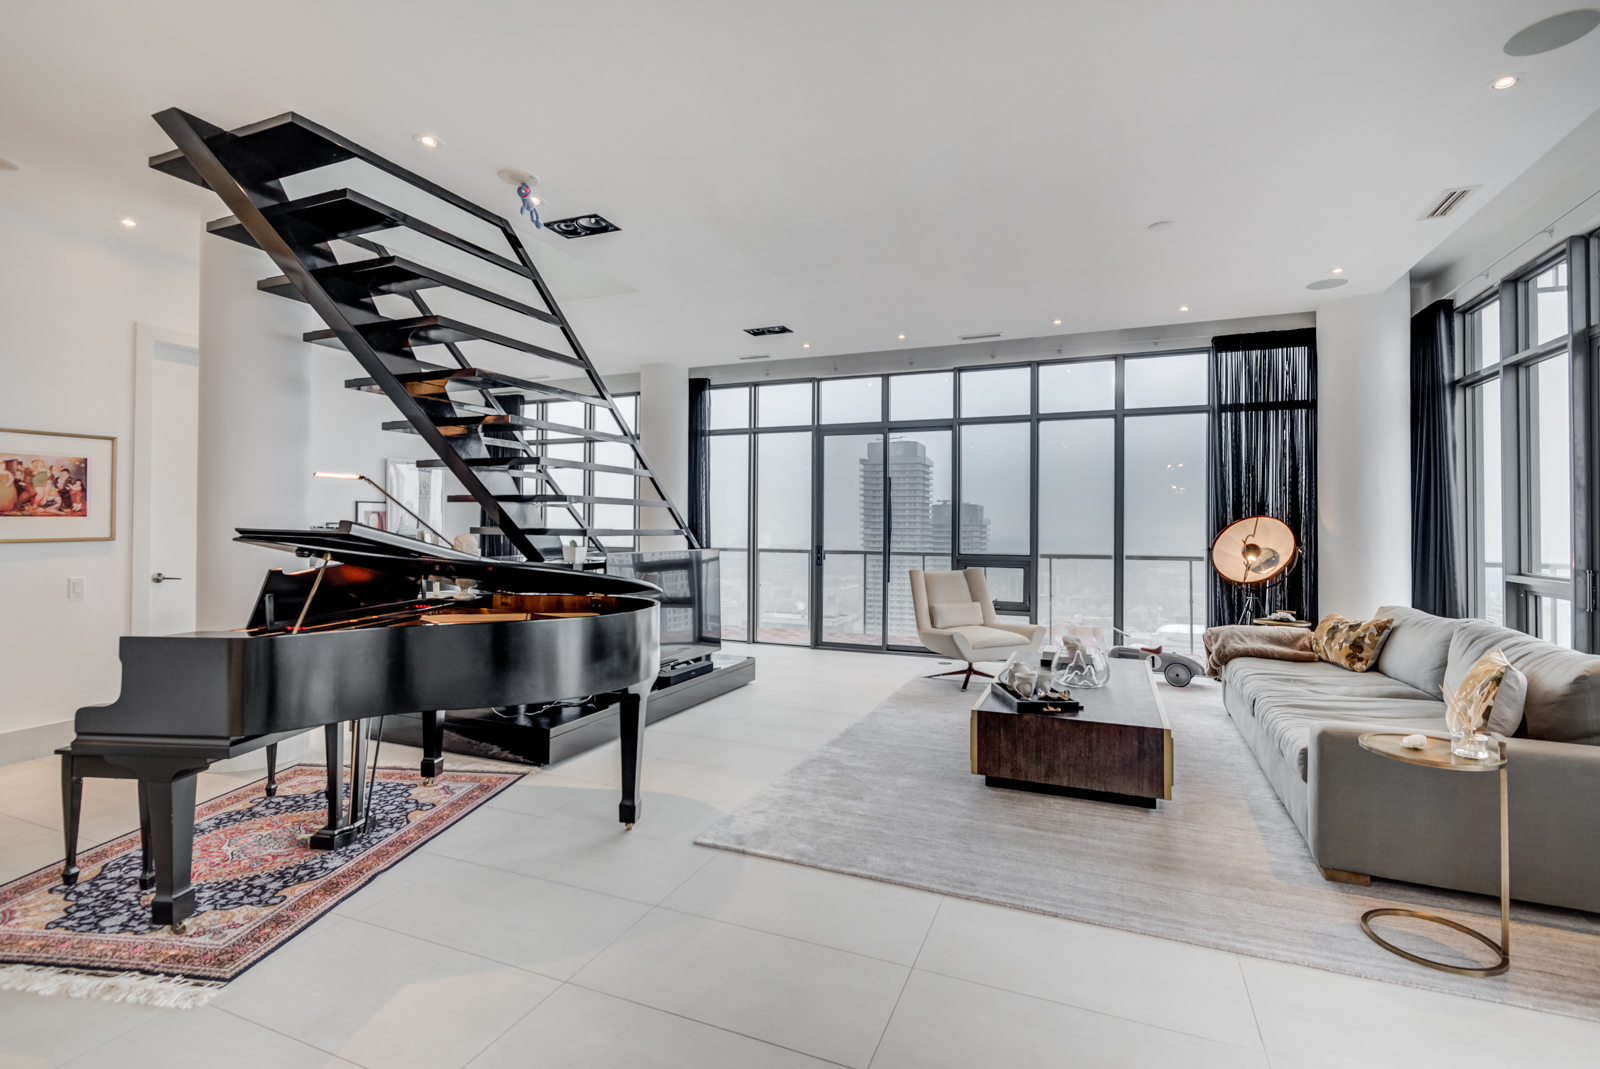 Second most expensive property with black piano, staircase, furniture in penthouse of 33 Charles St E penthouse unit.